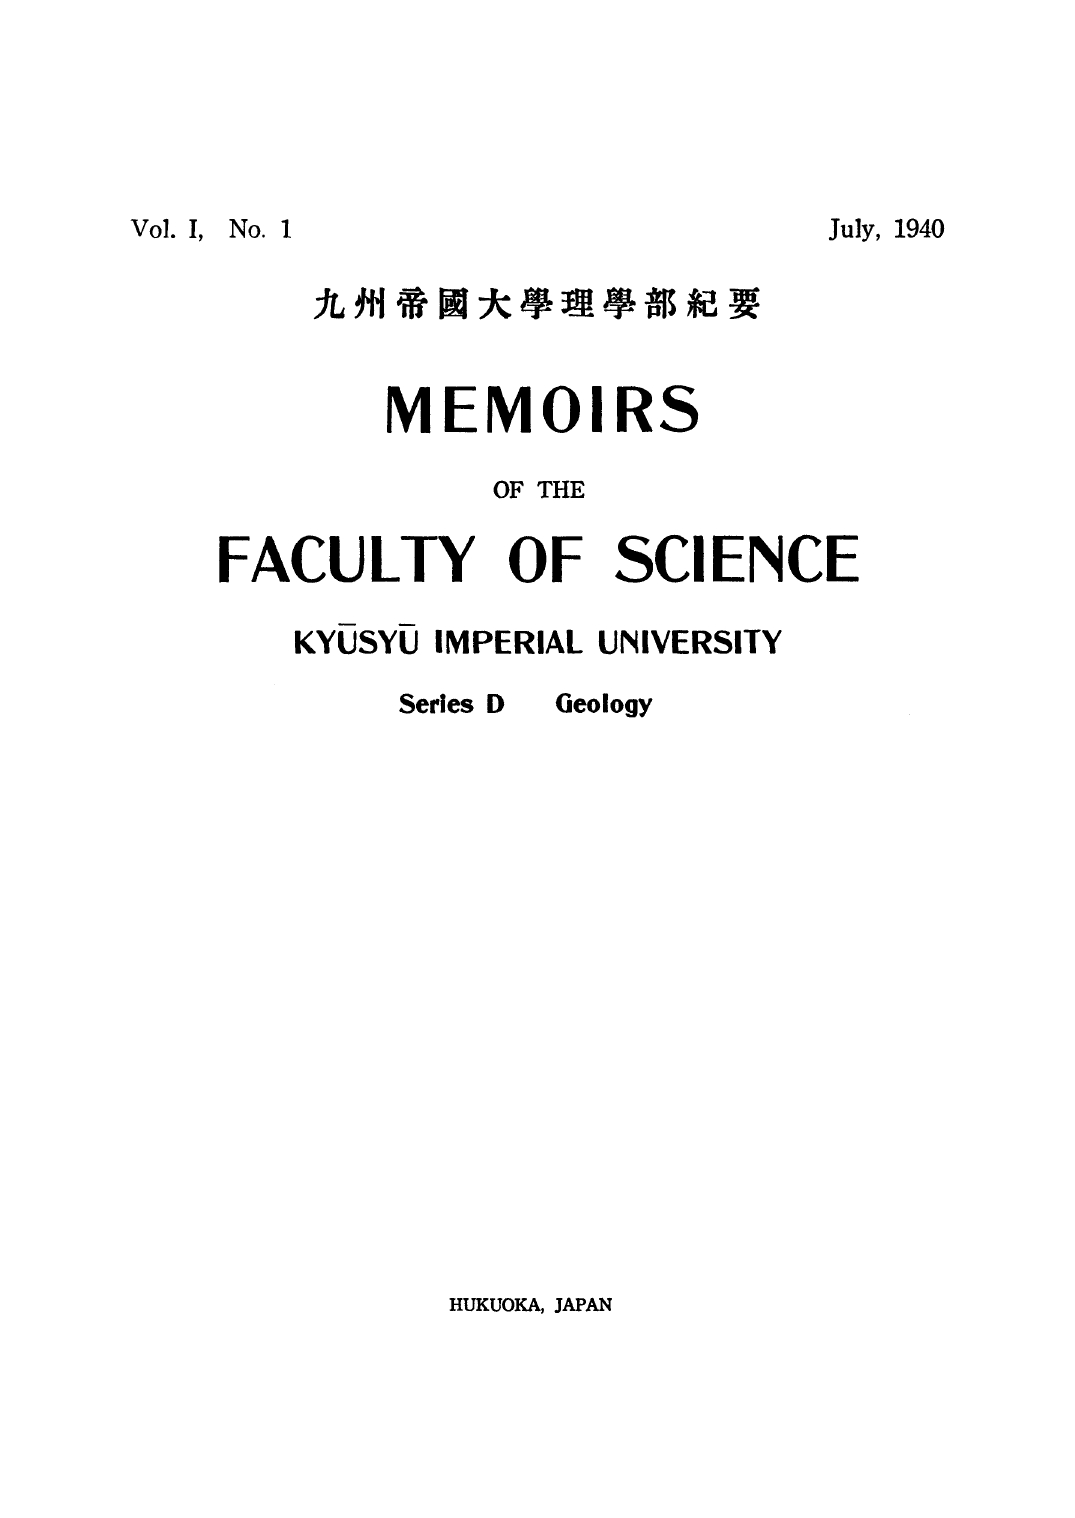 『Memoirs of the Faculty of Science, Kyūsyū Imperial University. Series D, Geology』The first issue cover